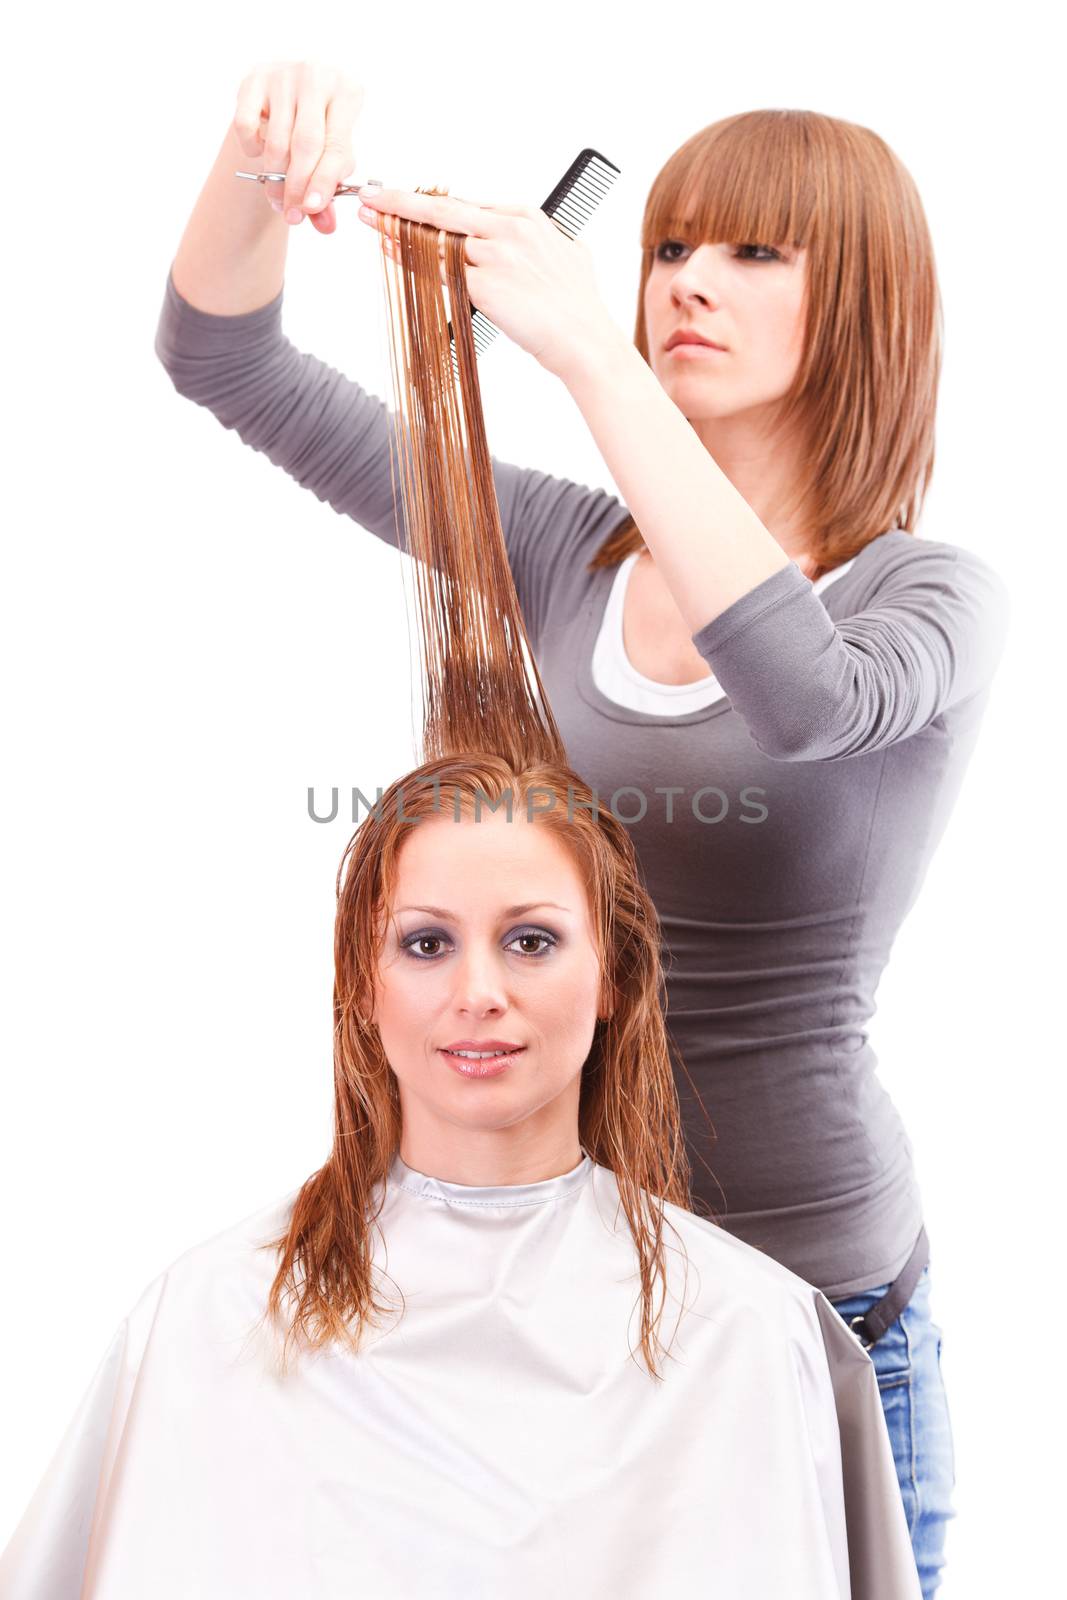 Hairdresser cutting the hair of a blonde woman